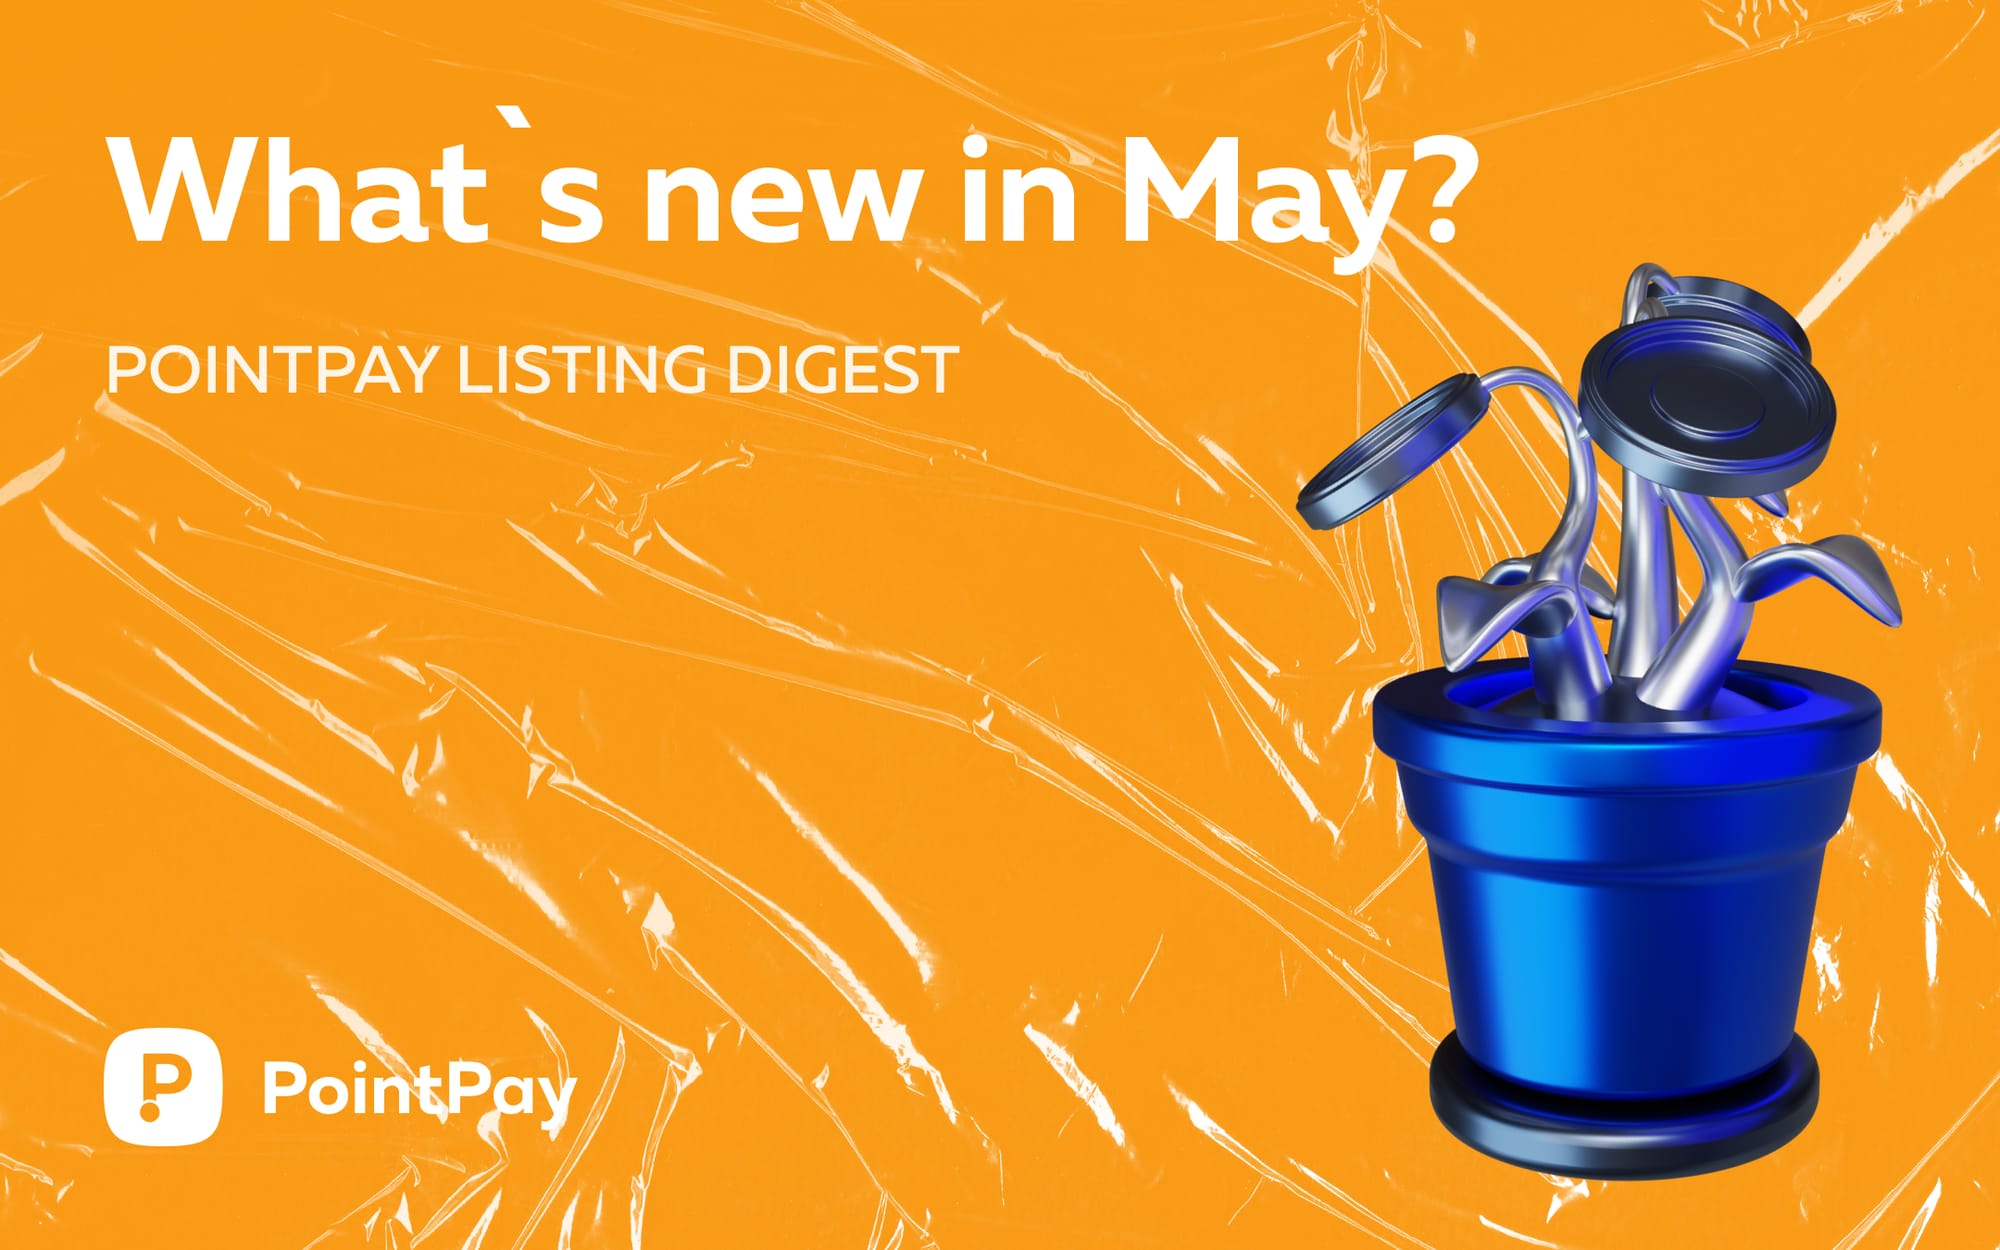 PointPay Listing Digest: May brings the heat!